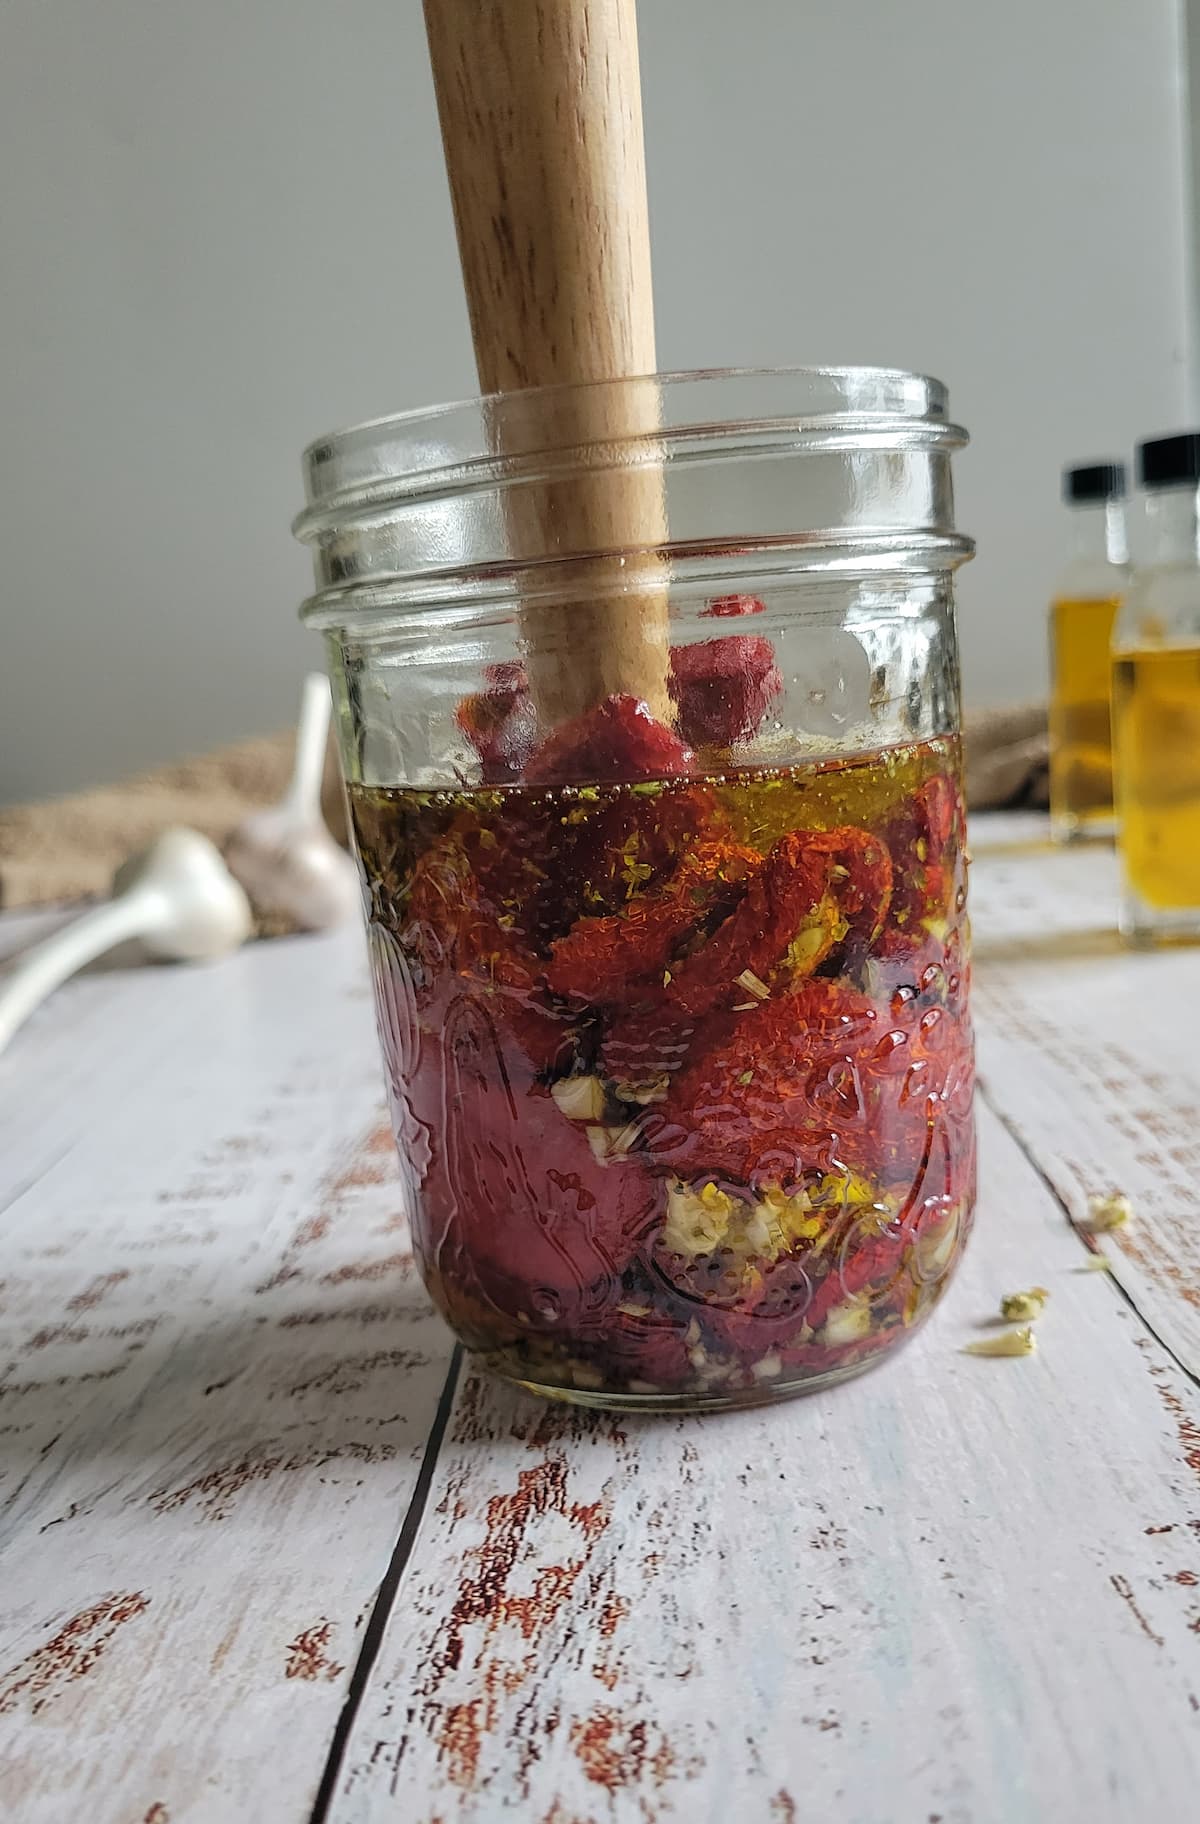 long wooden object in a jar with sun dried tomatoes, garlic and oil